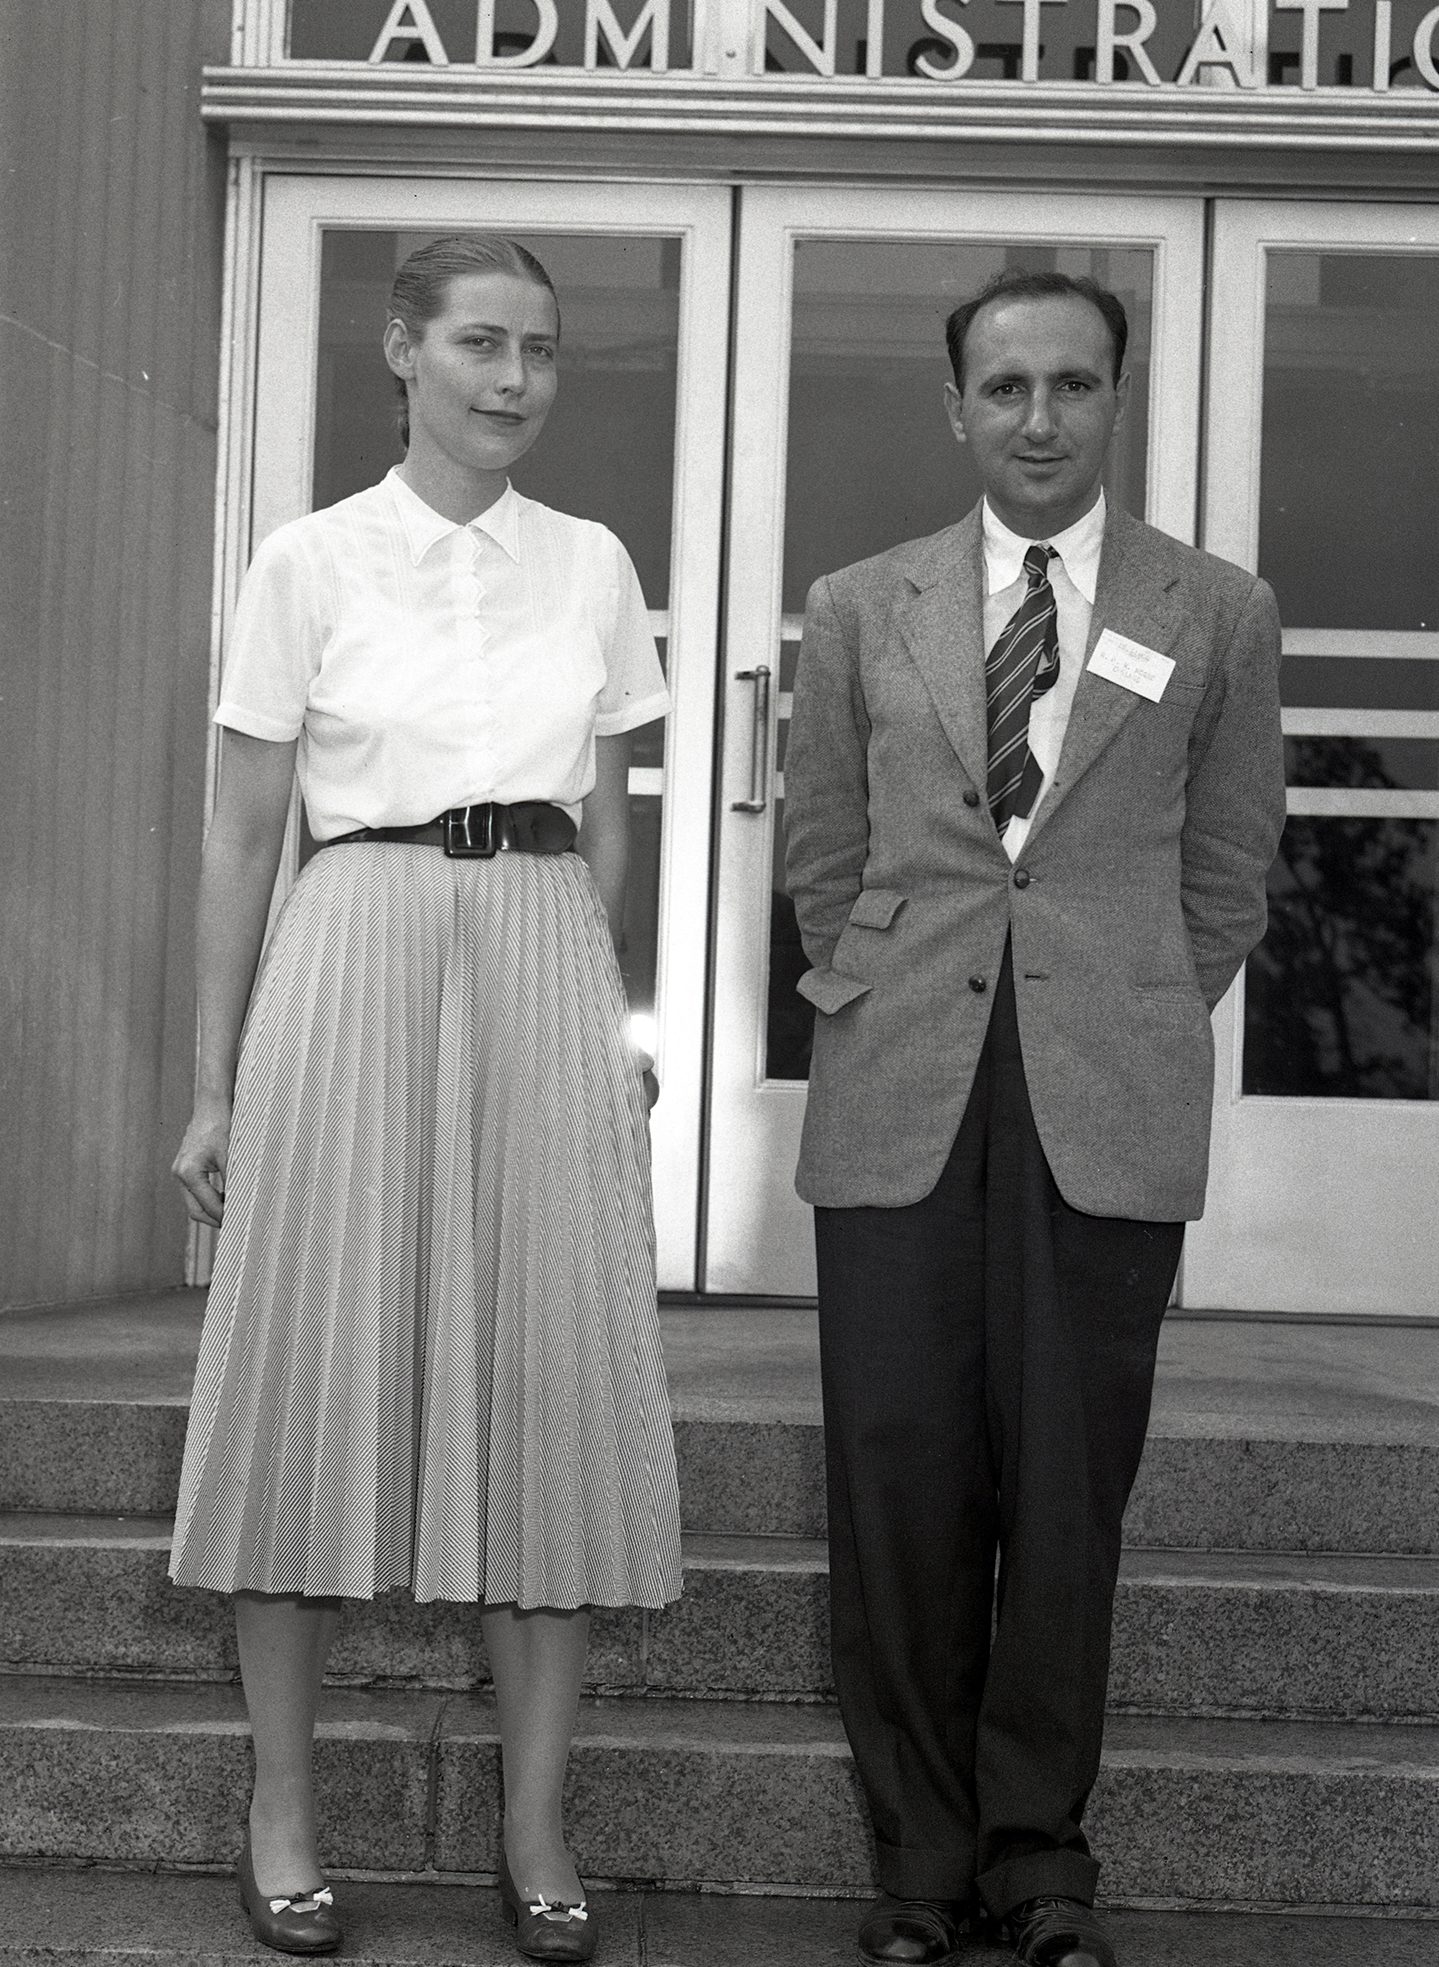 Woman and man posing for photograph on steps of Administration Building.